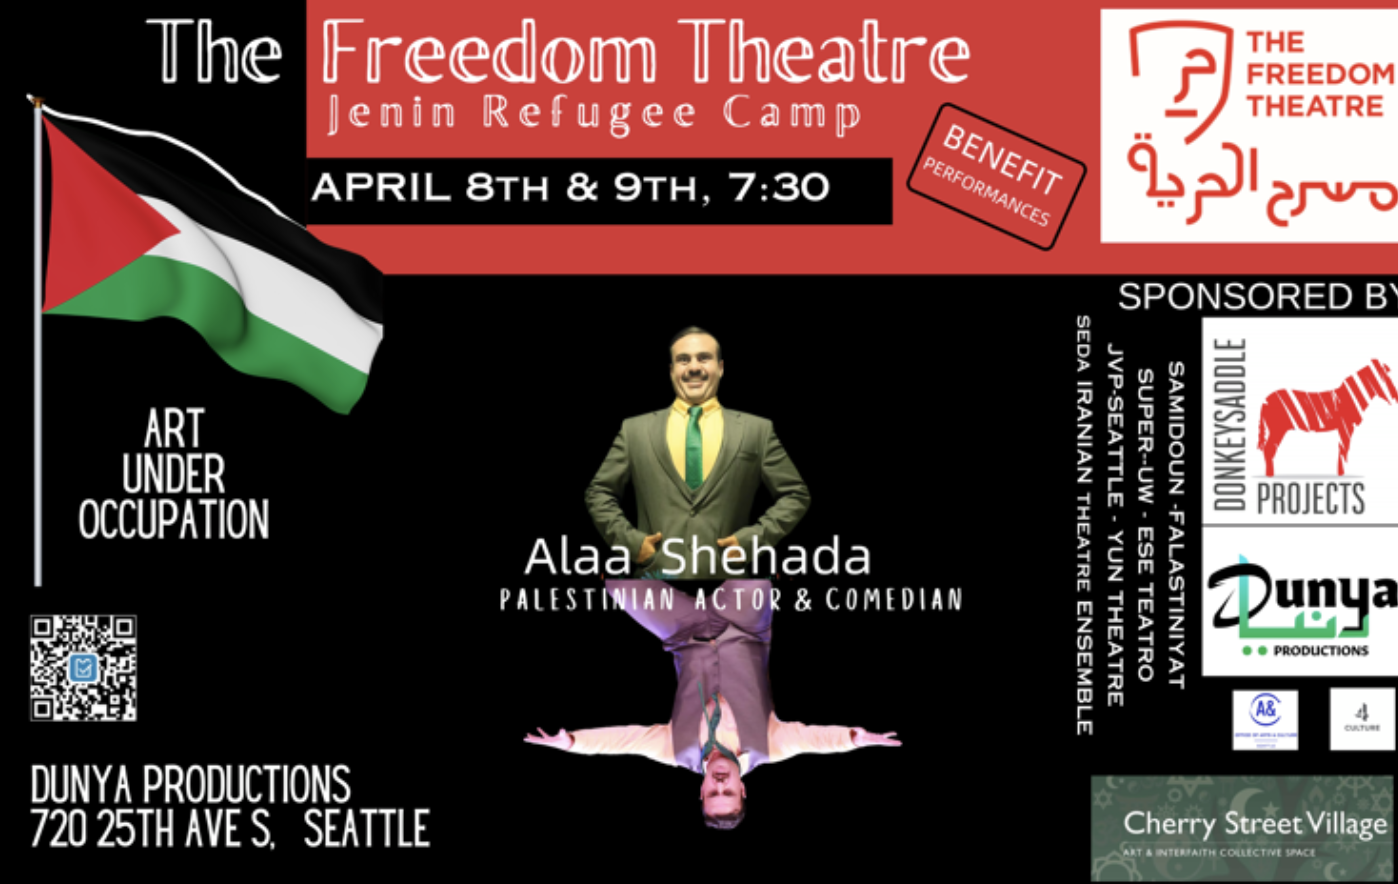 BENEFIT PERFORMANCES by Alaa Shehada from The Freedom Theatre